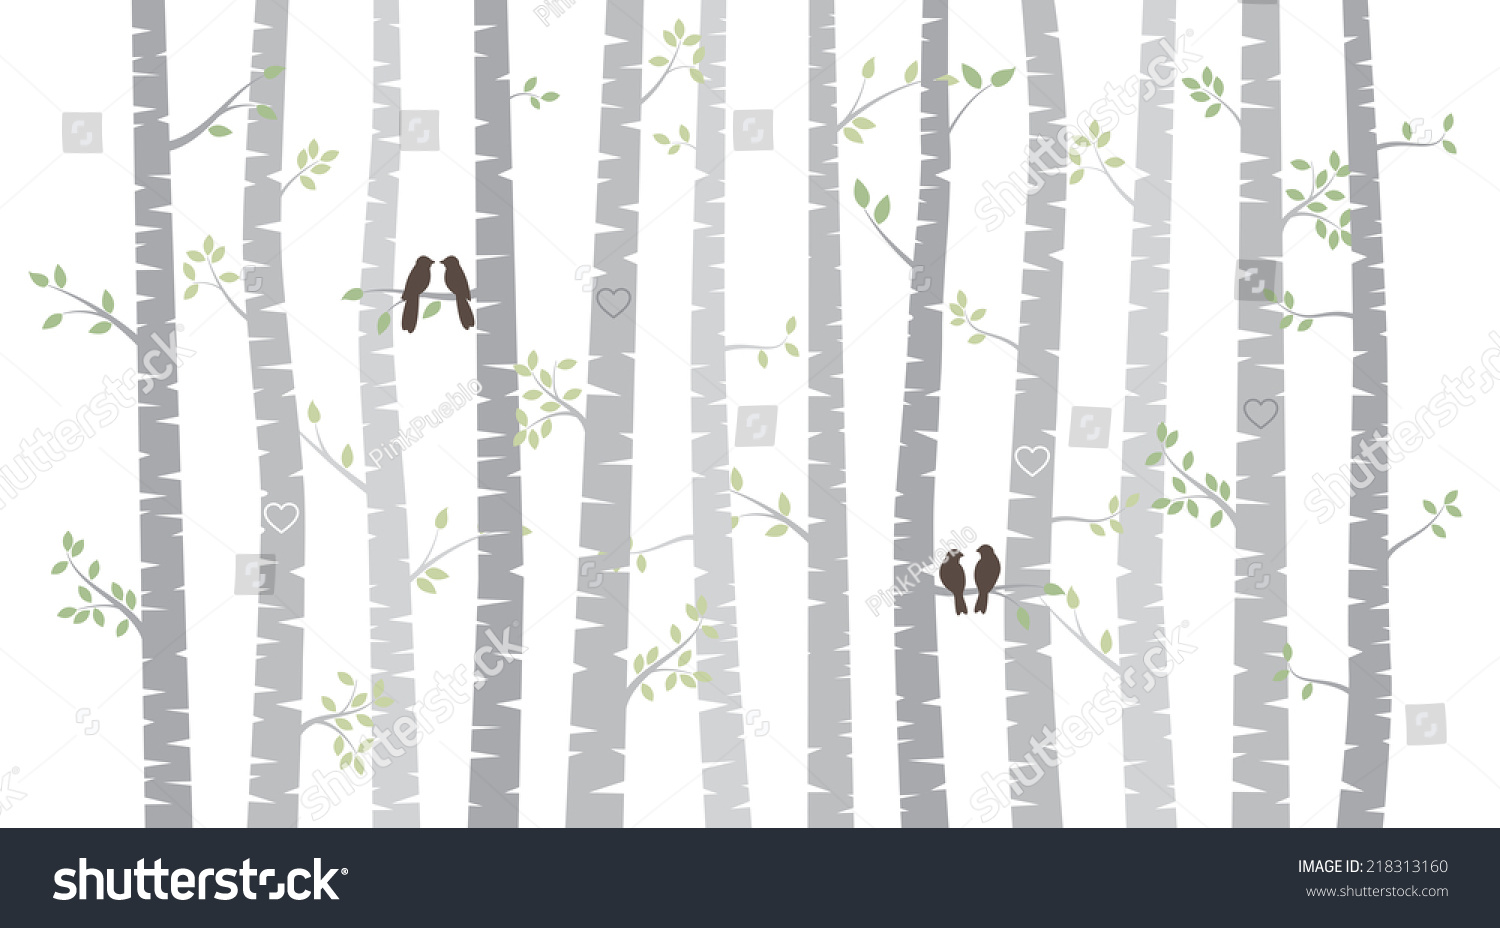 SVG of Vector Birch or Aspen Trees with Autumn Leaves and Love Birds svg